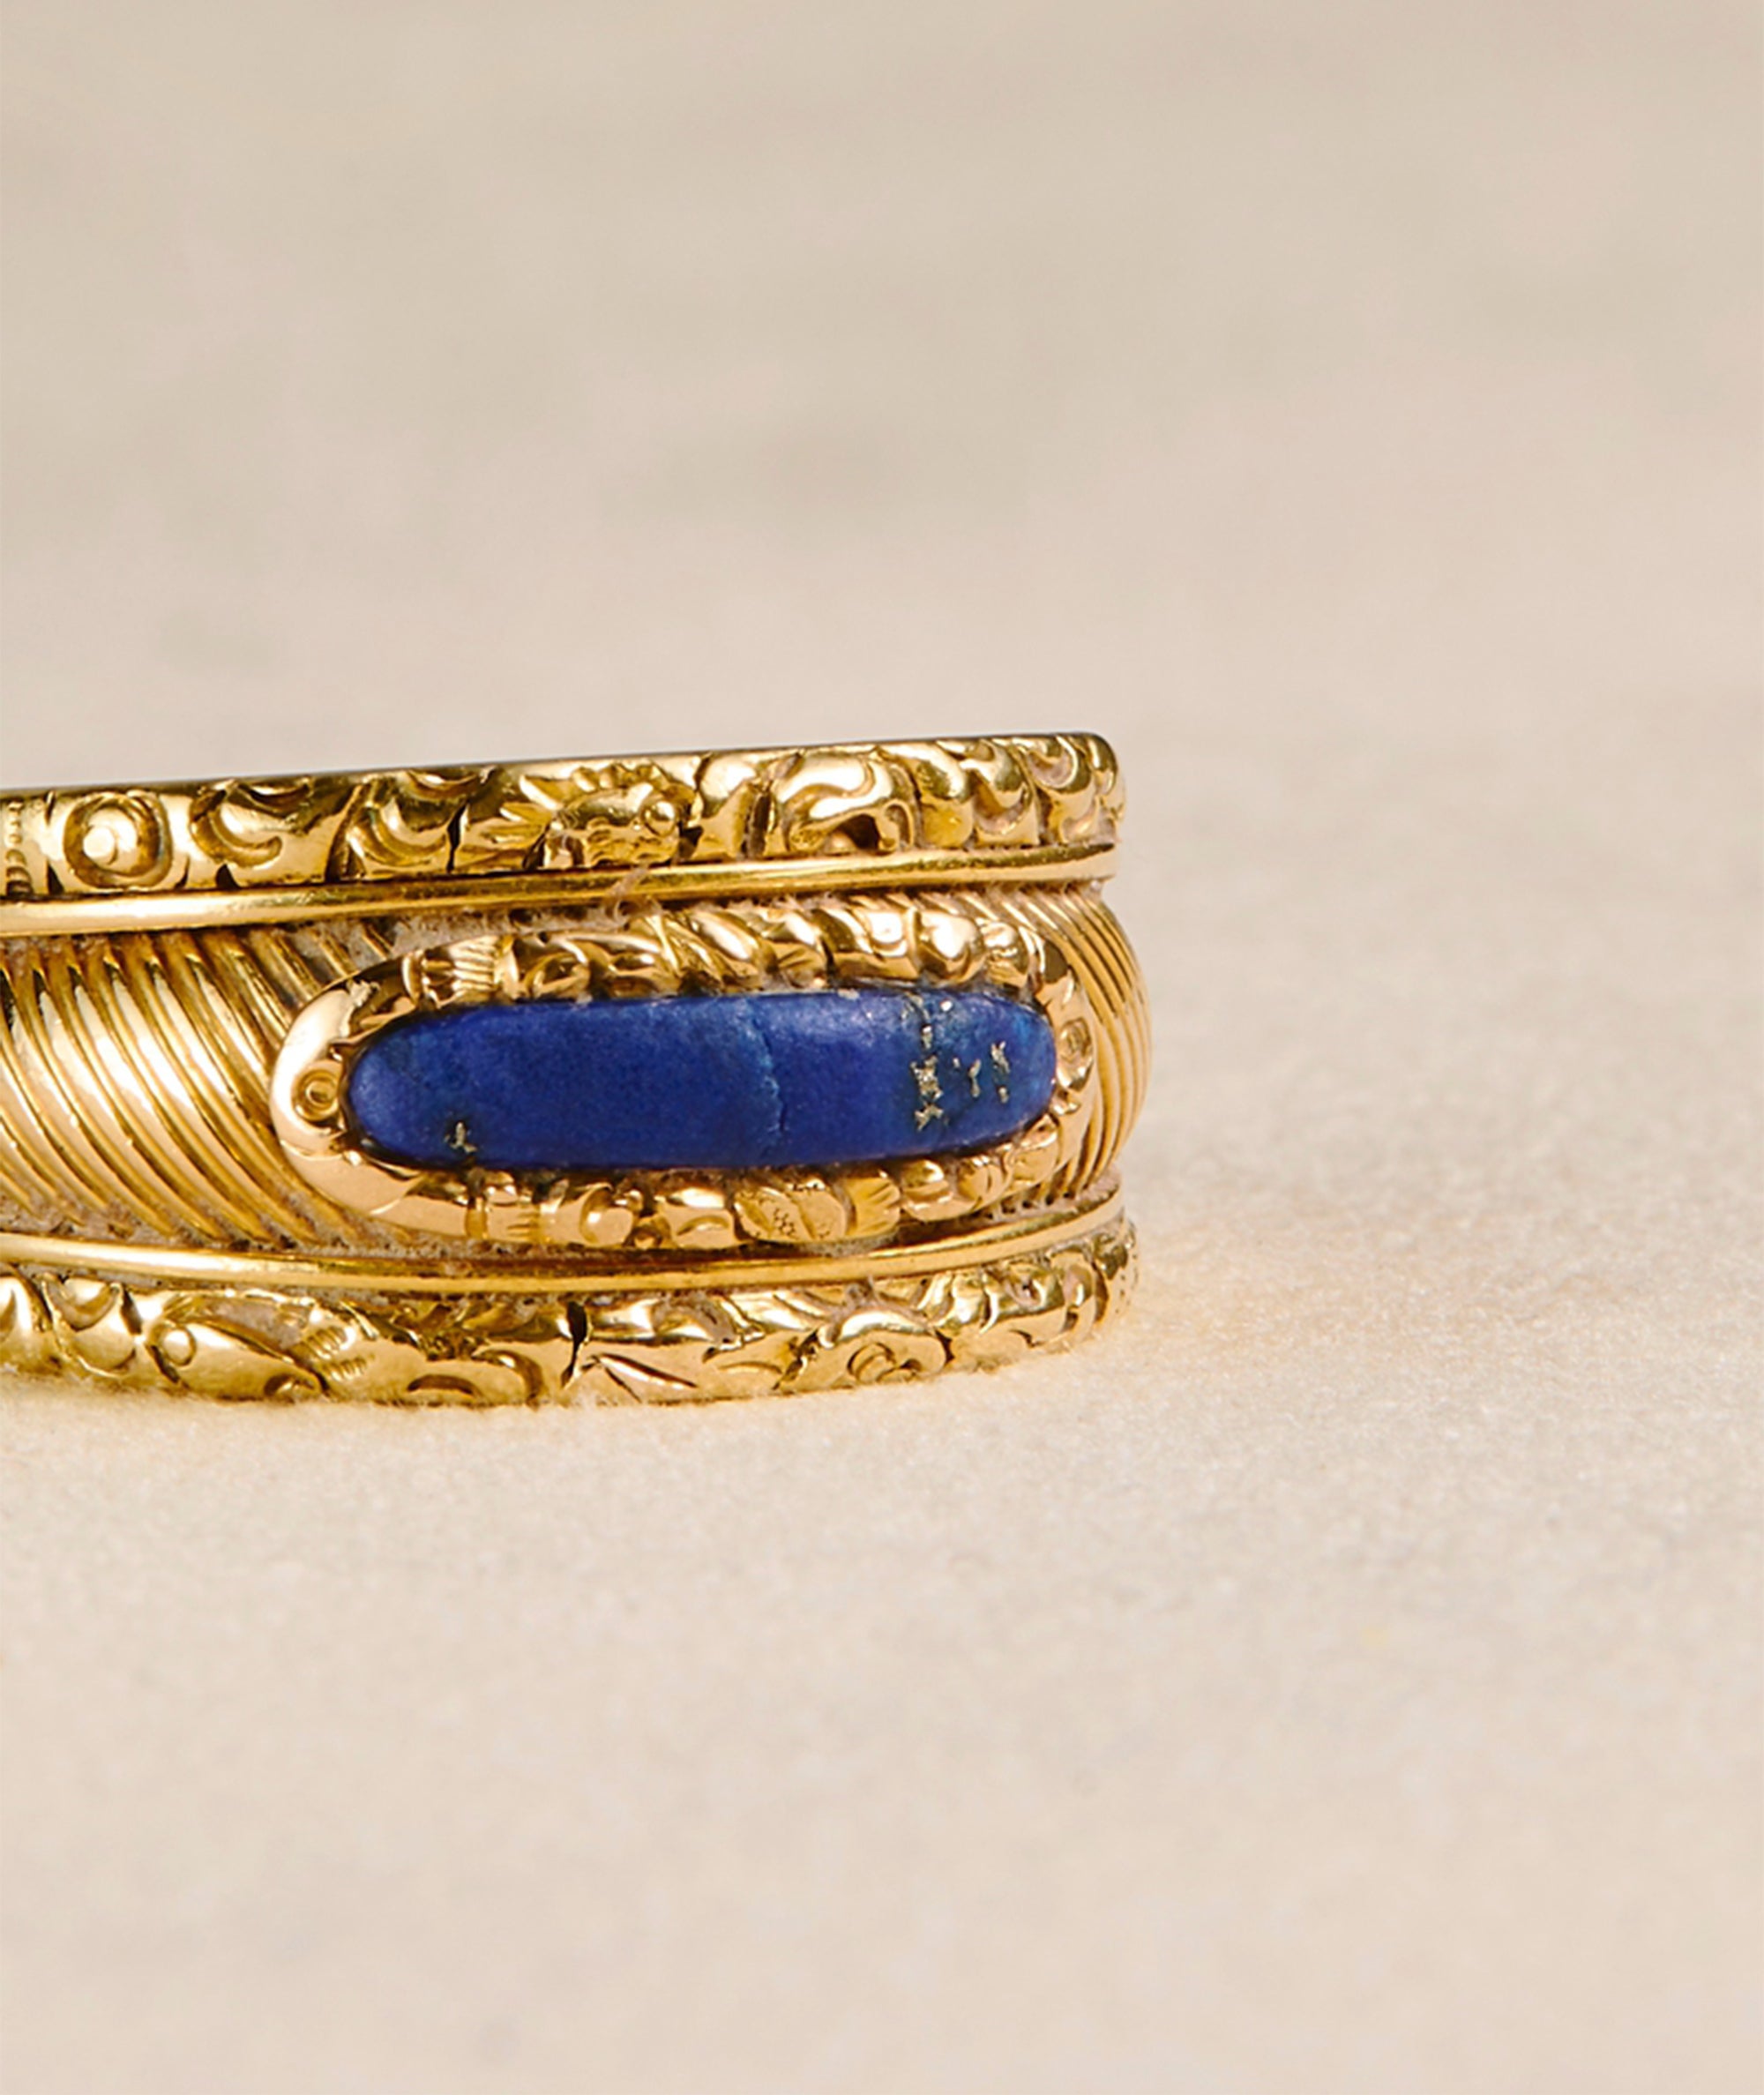 Vintage ring in yellow gold. Exclusively sourced for EREDE Curated.